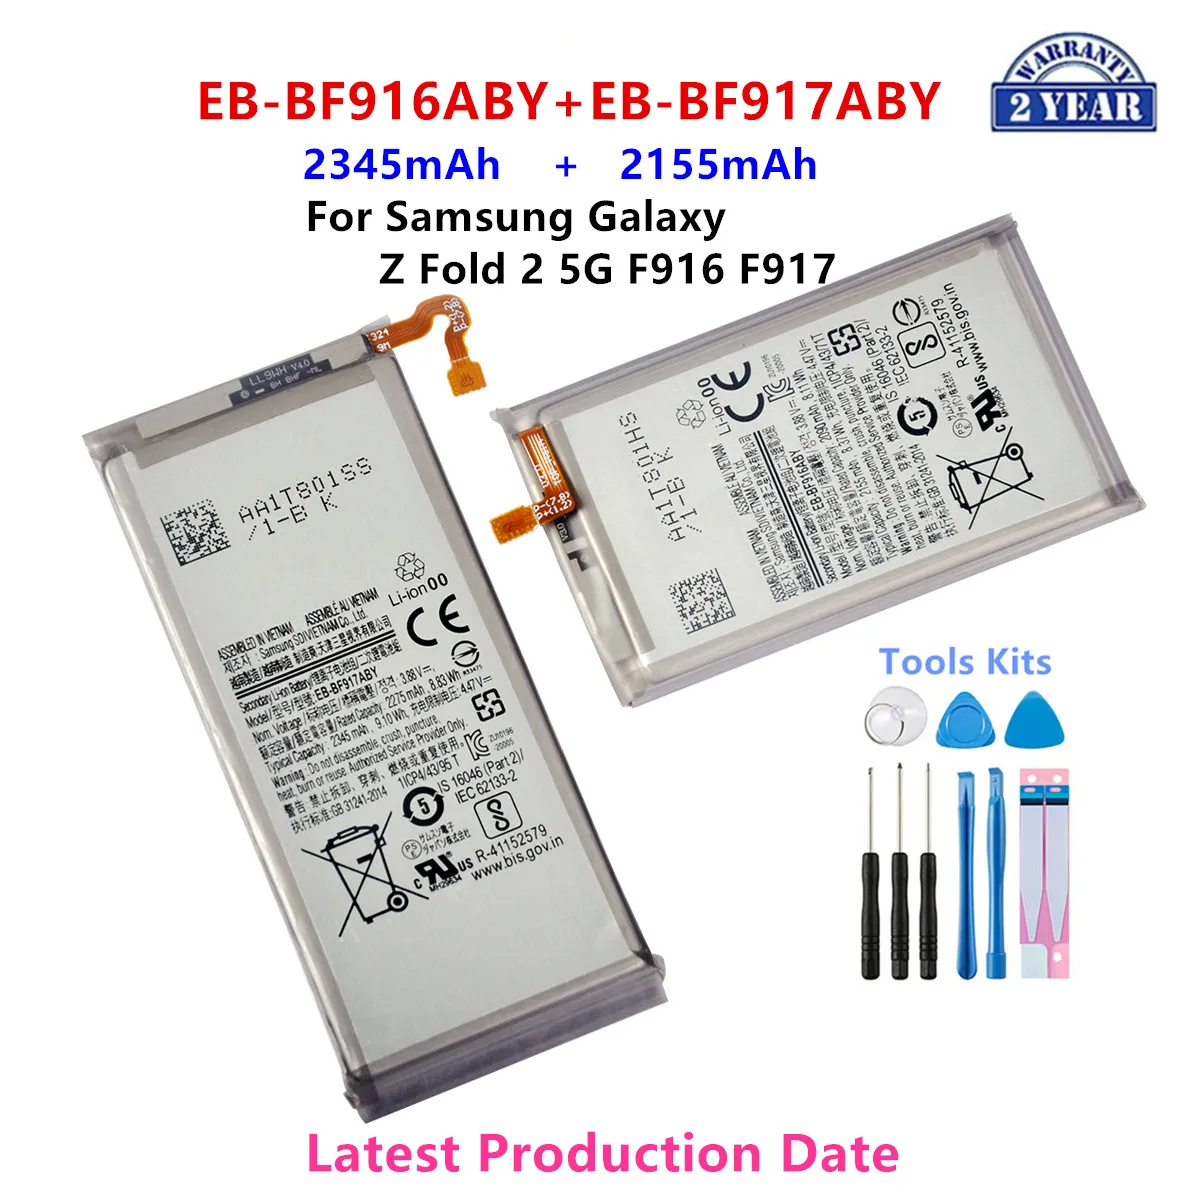 

Brand New EB-BF916ABY EB-BF917ABY( 2345mAh+2155mAh) Battery For Samsung Galaxy Z Fold 2 5G F916 F917 Mobile Phone Batteries